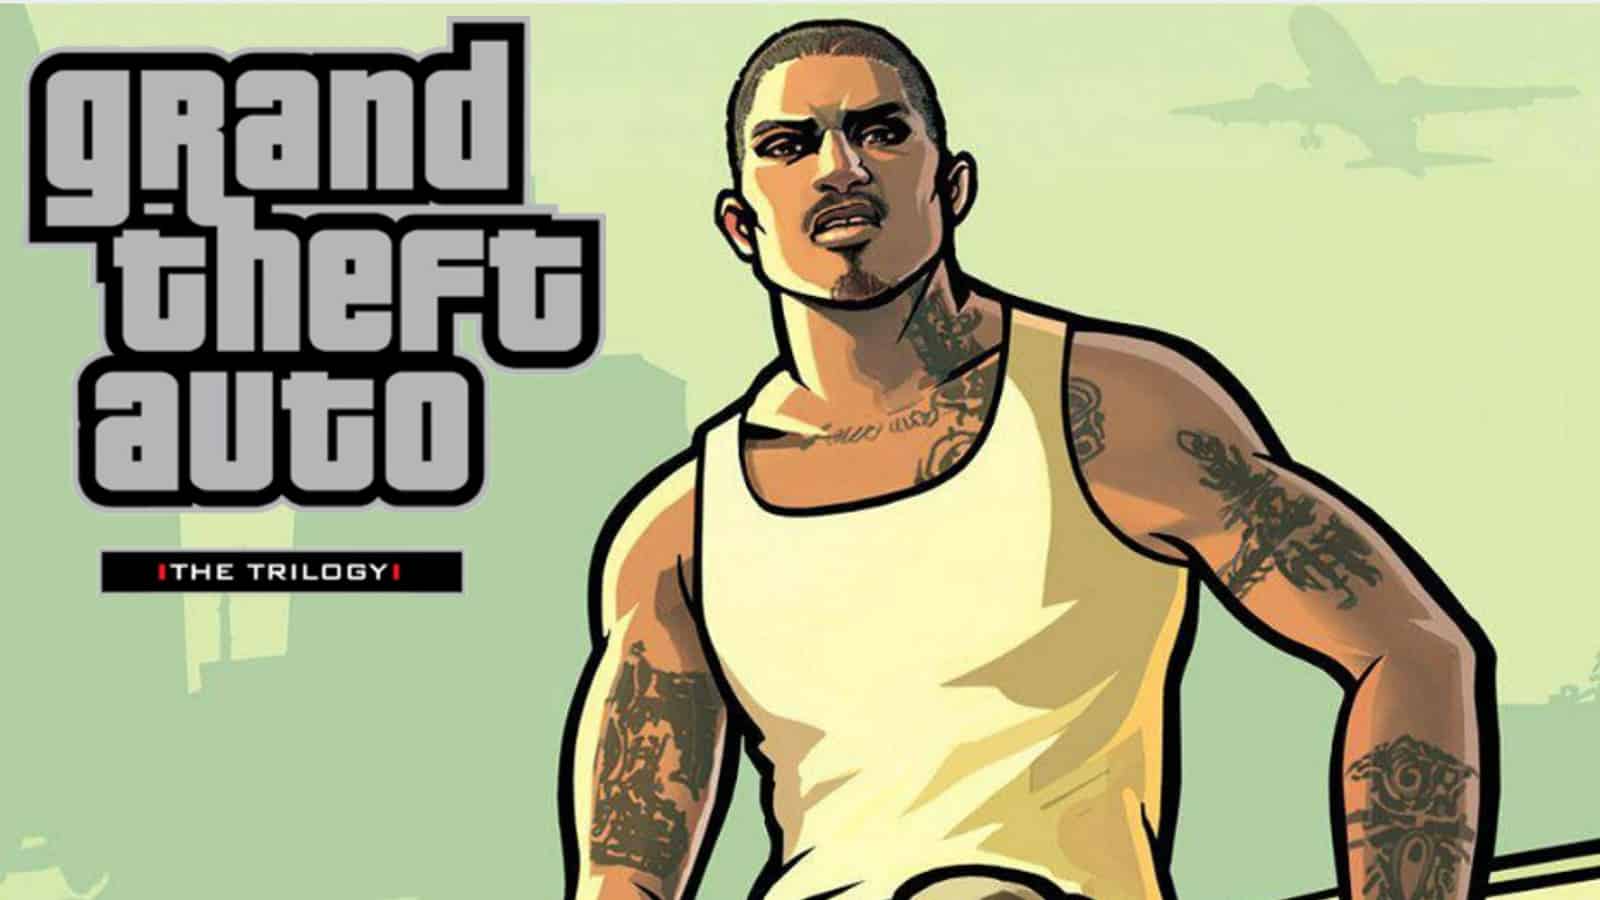 Now the achievement icons have leaked for GTA 3, Vice City and San